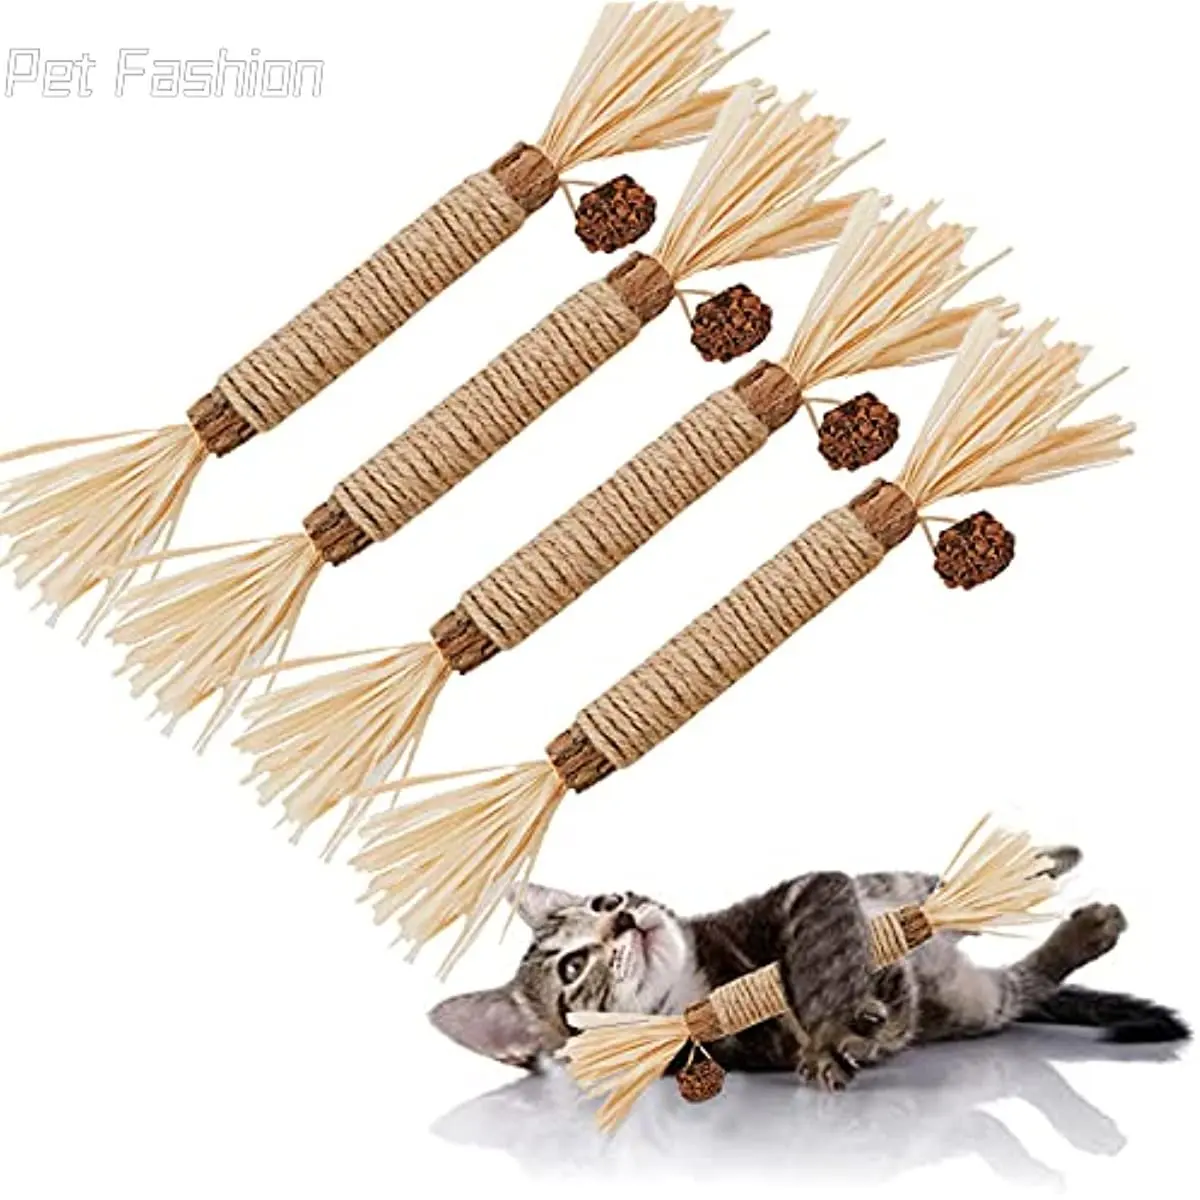 

2023 new Cat Toys Silvervine Chew Stick,Kitten Treat Catnip Toy Kitty Natural Stuff with Catnip for Cleaning Teeth Indoor Dental